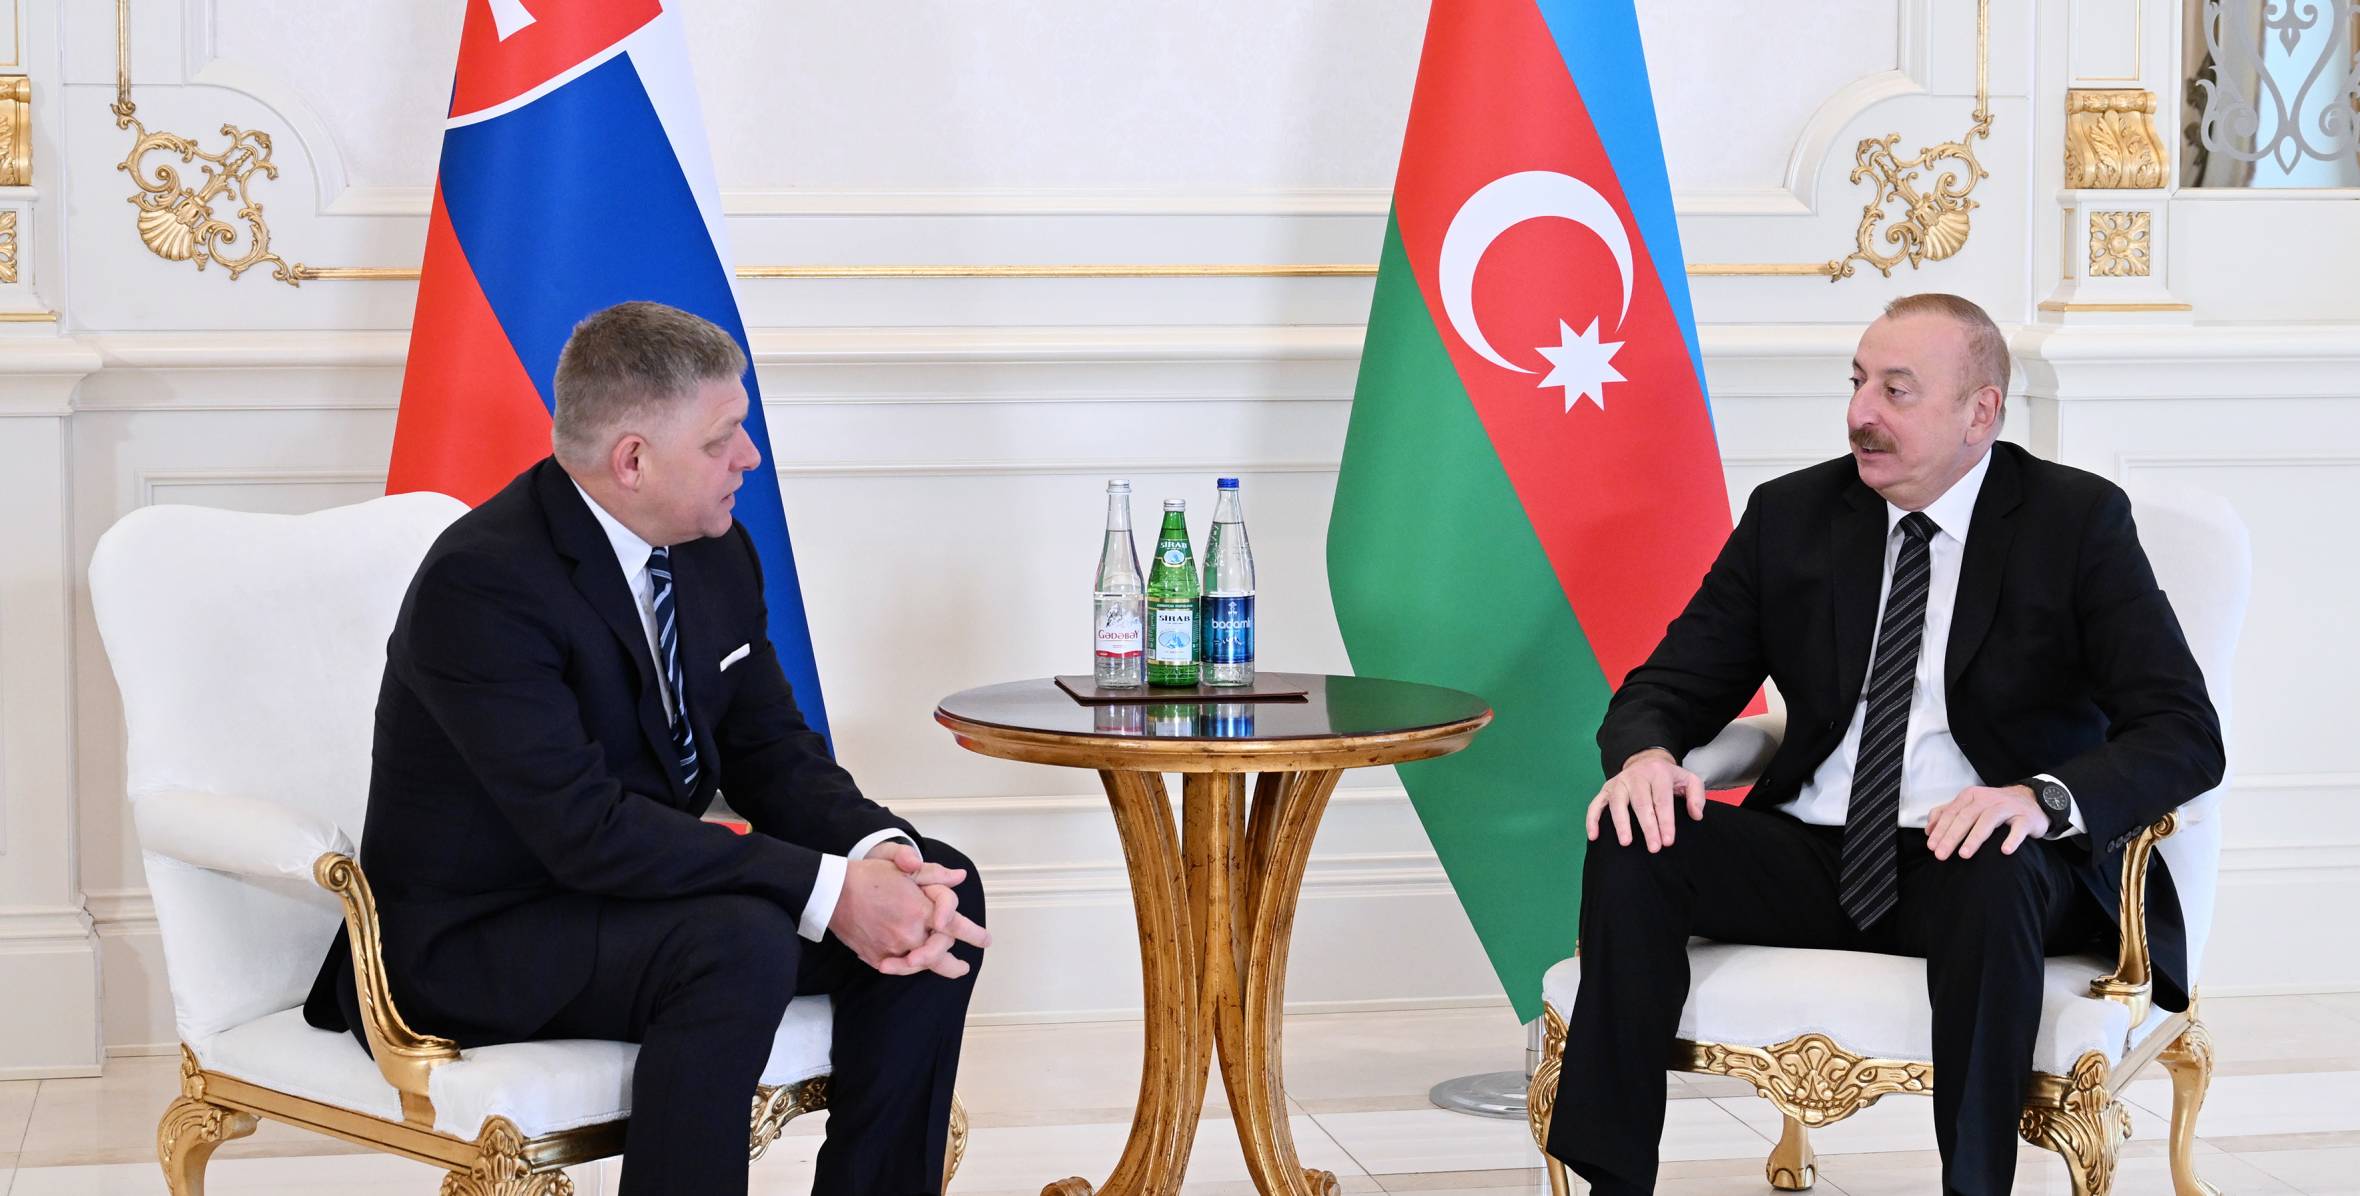 Ilham Aliyev held one-on-one meeting with Prime Minister of Slovakia